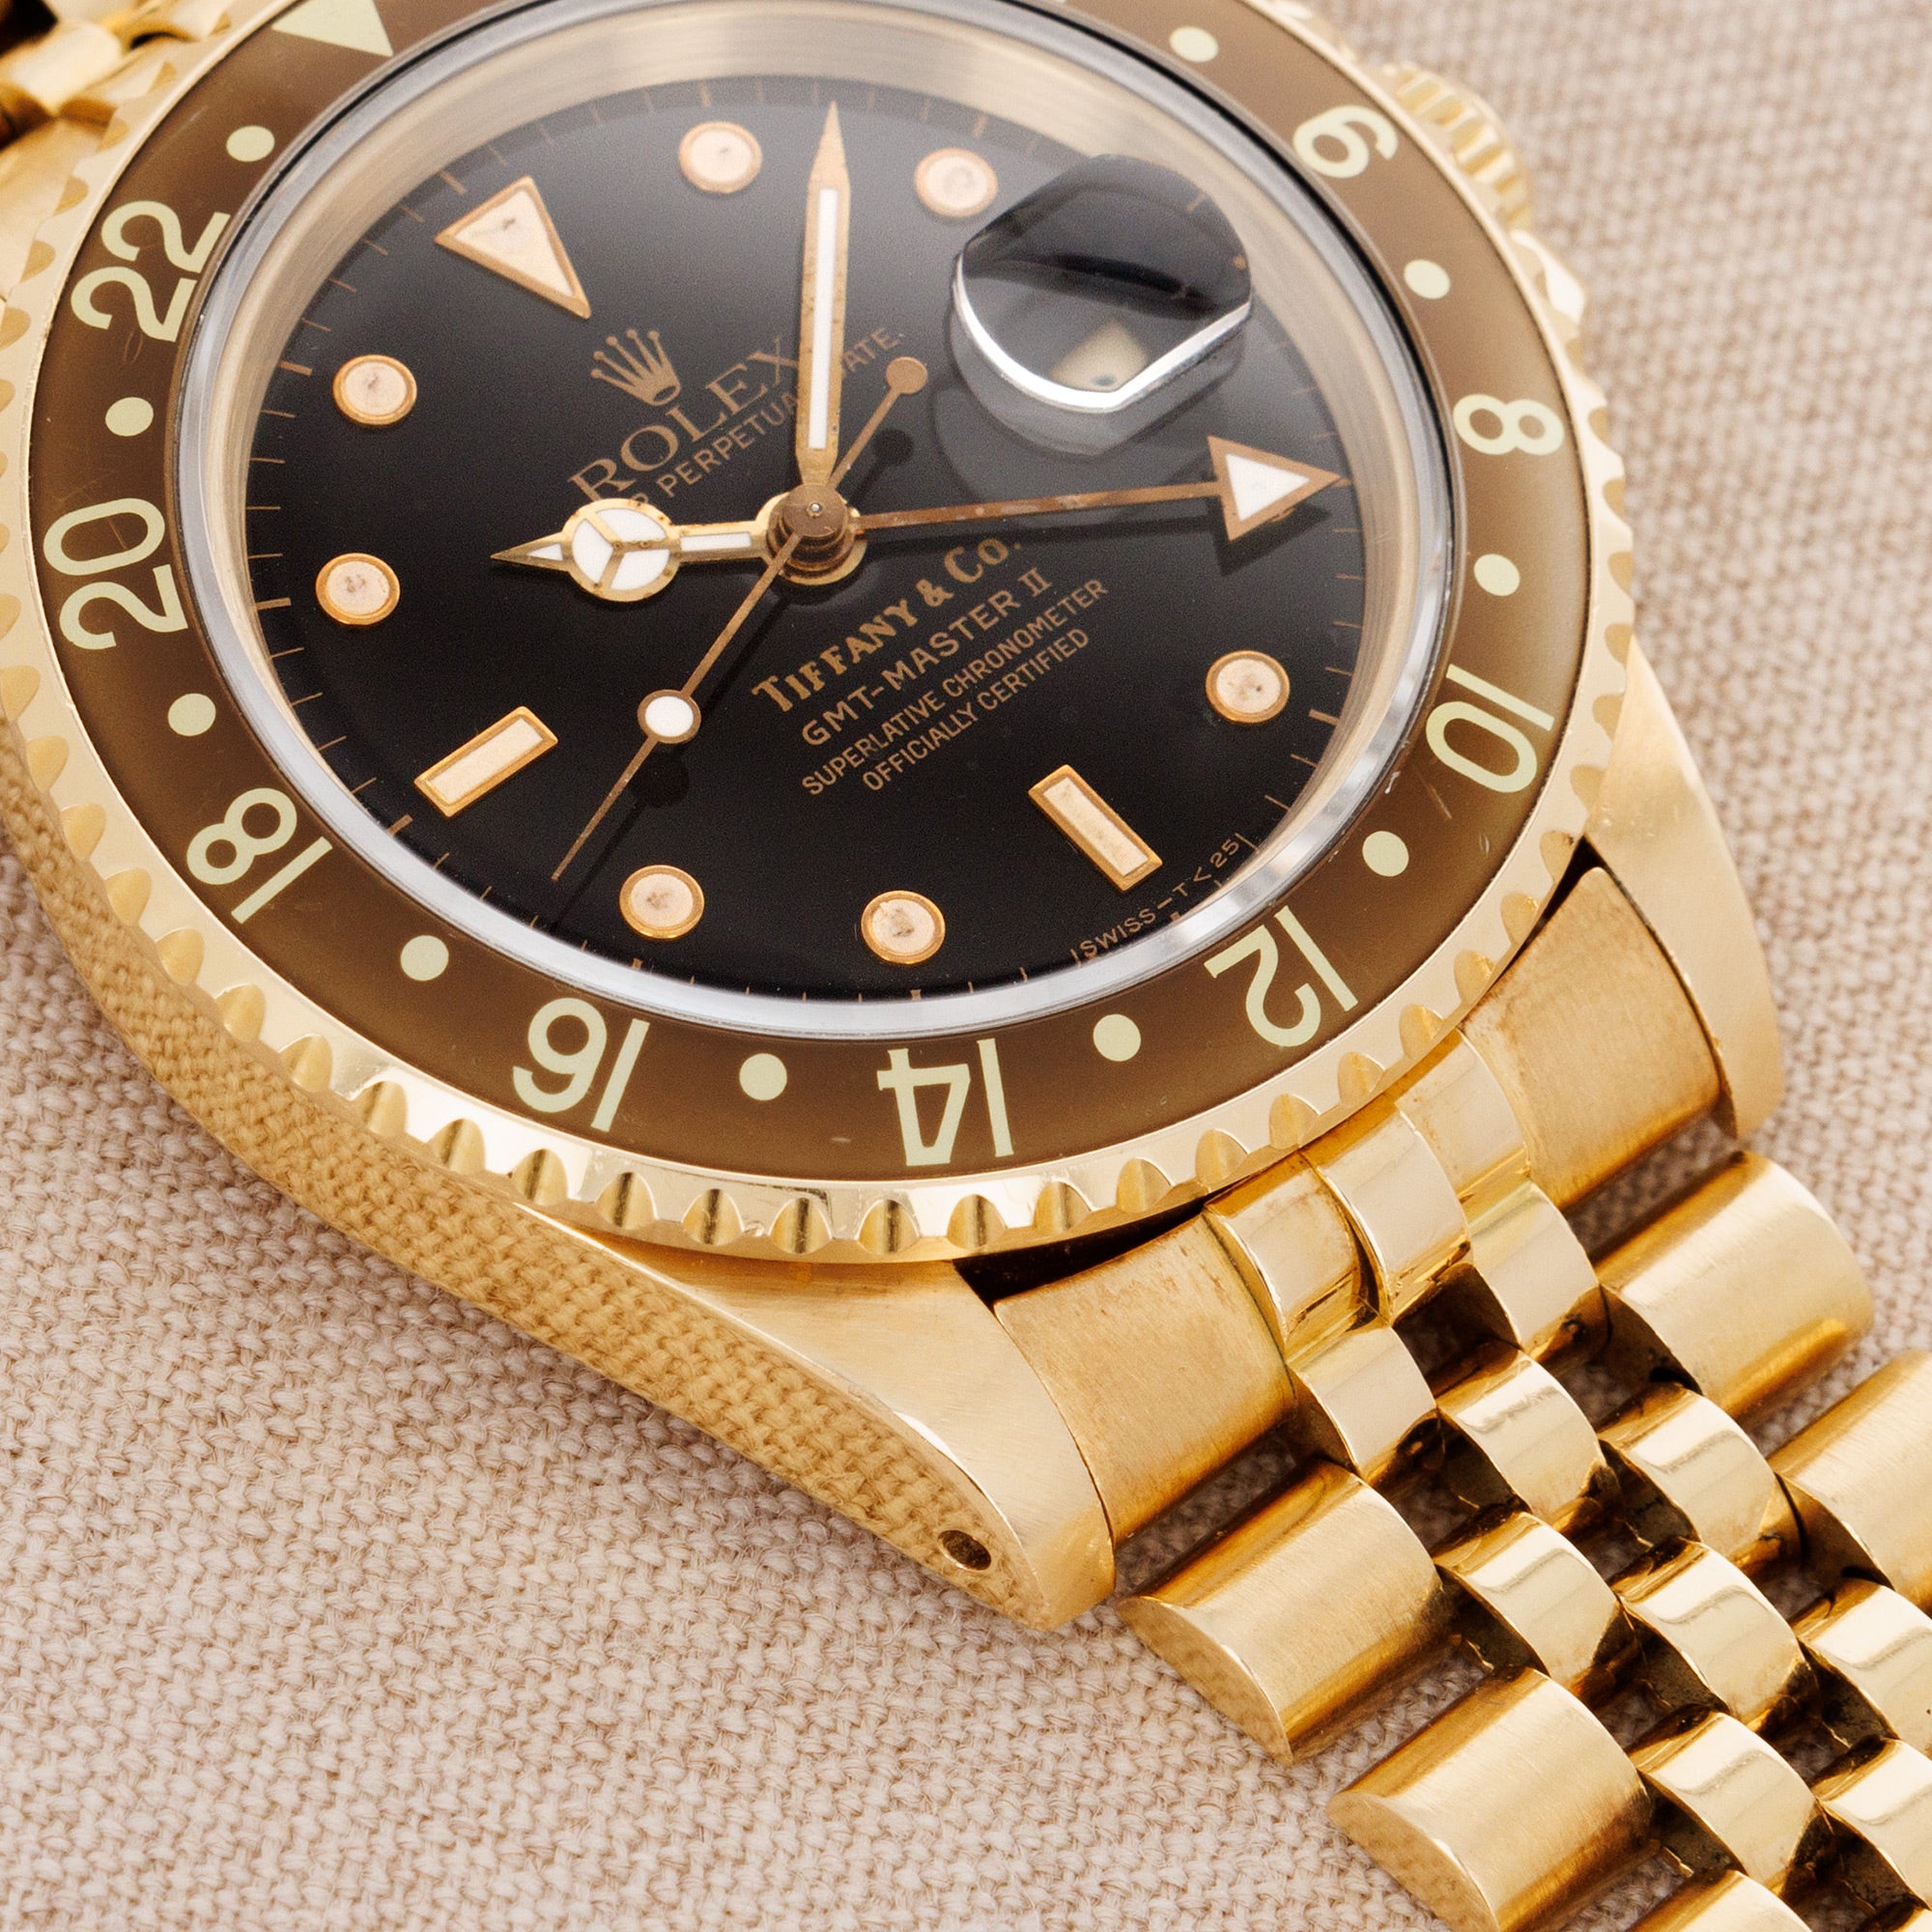 Rolex Yellow Gold GMT-Master II Ref. 16718 retailed by Tiffany &amp; Co.